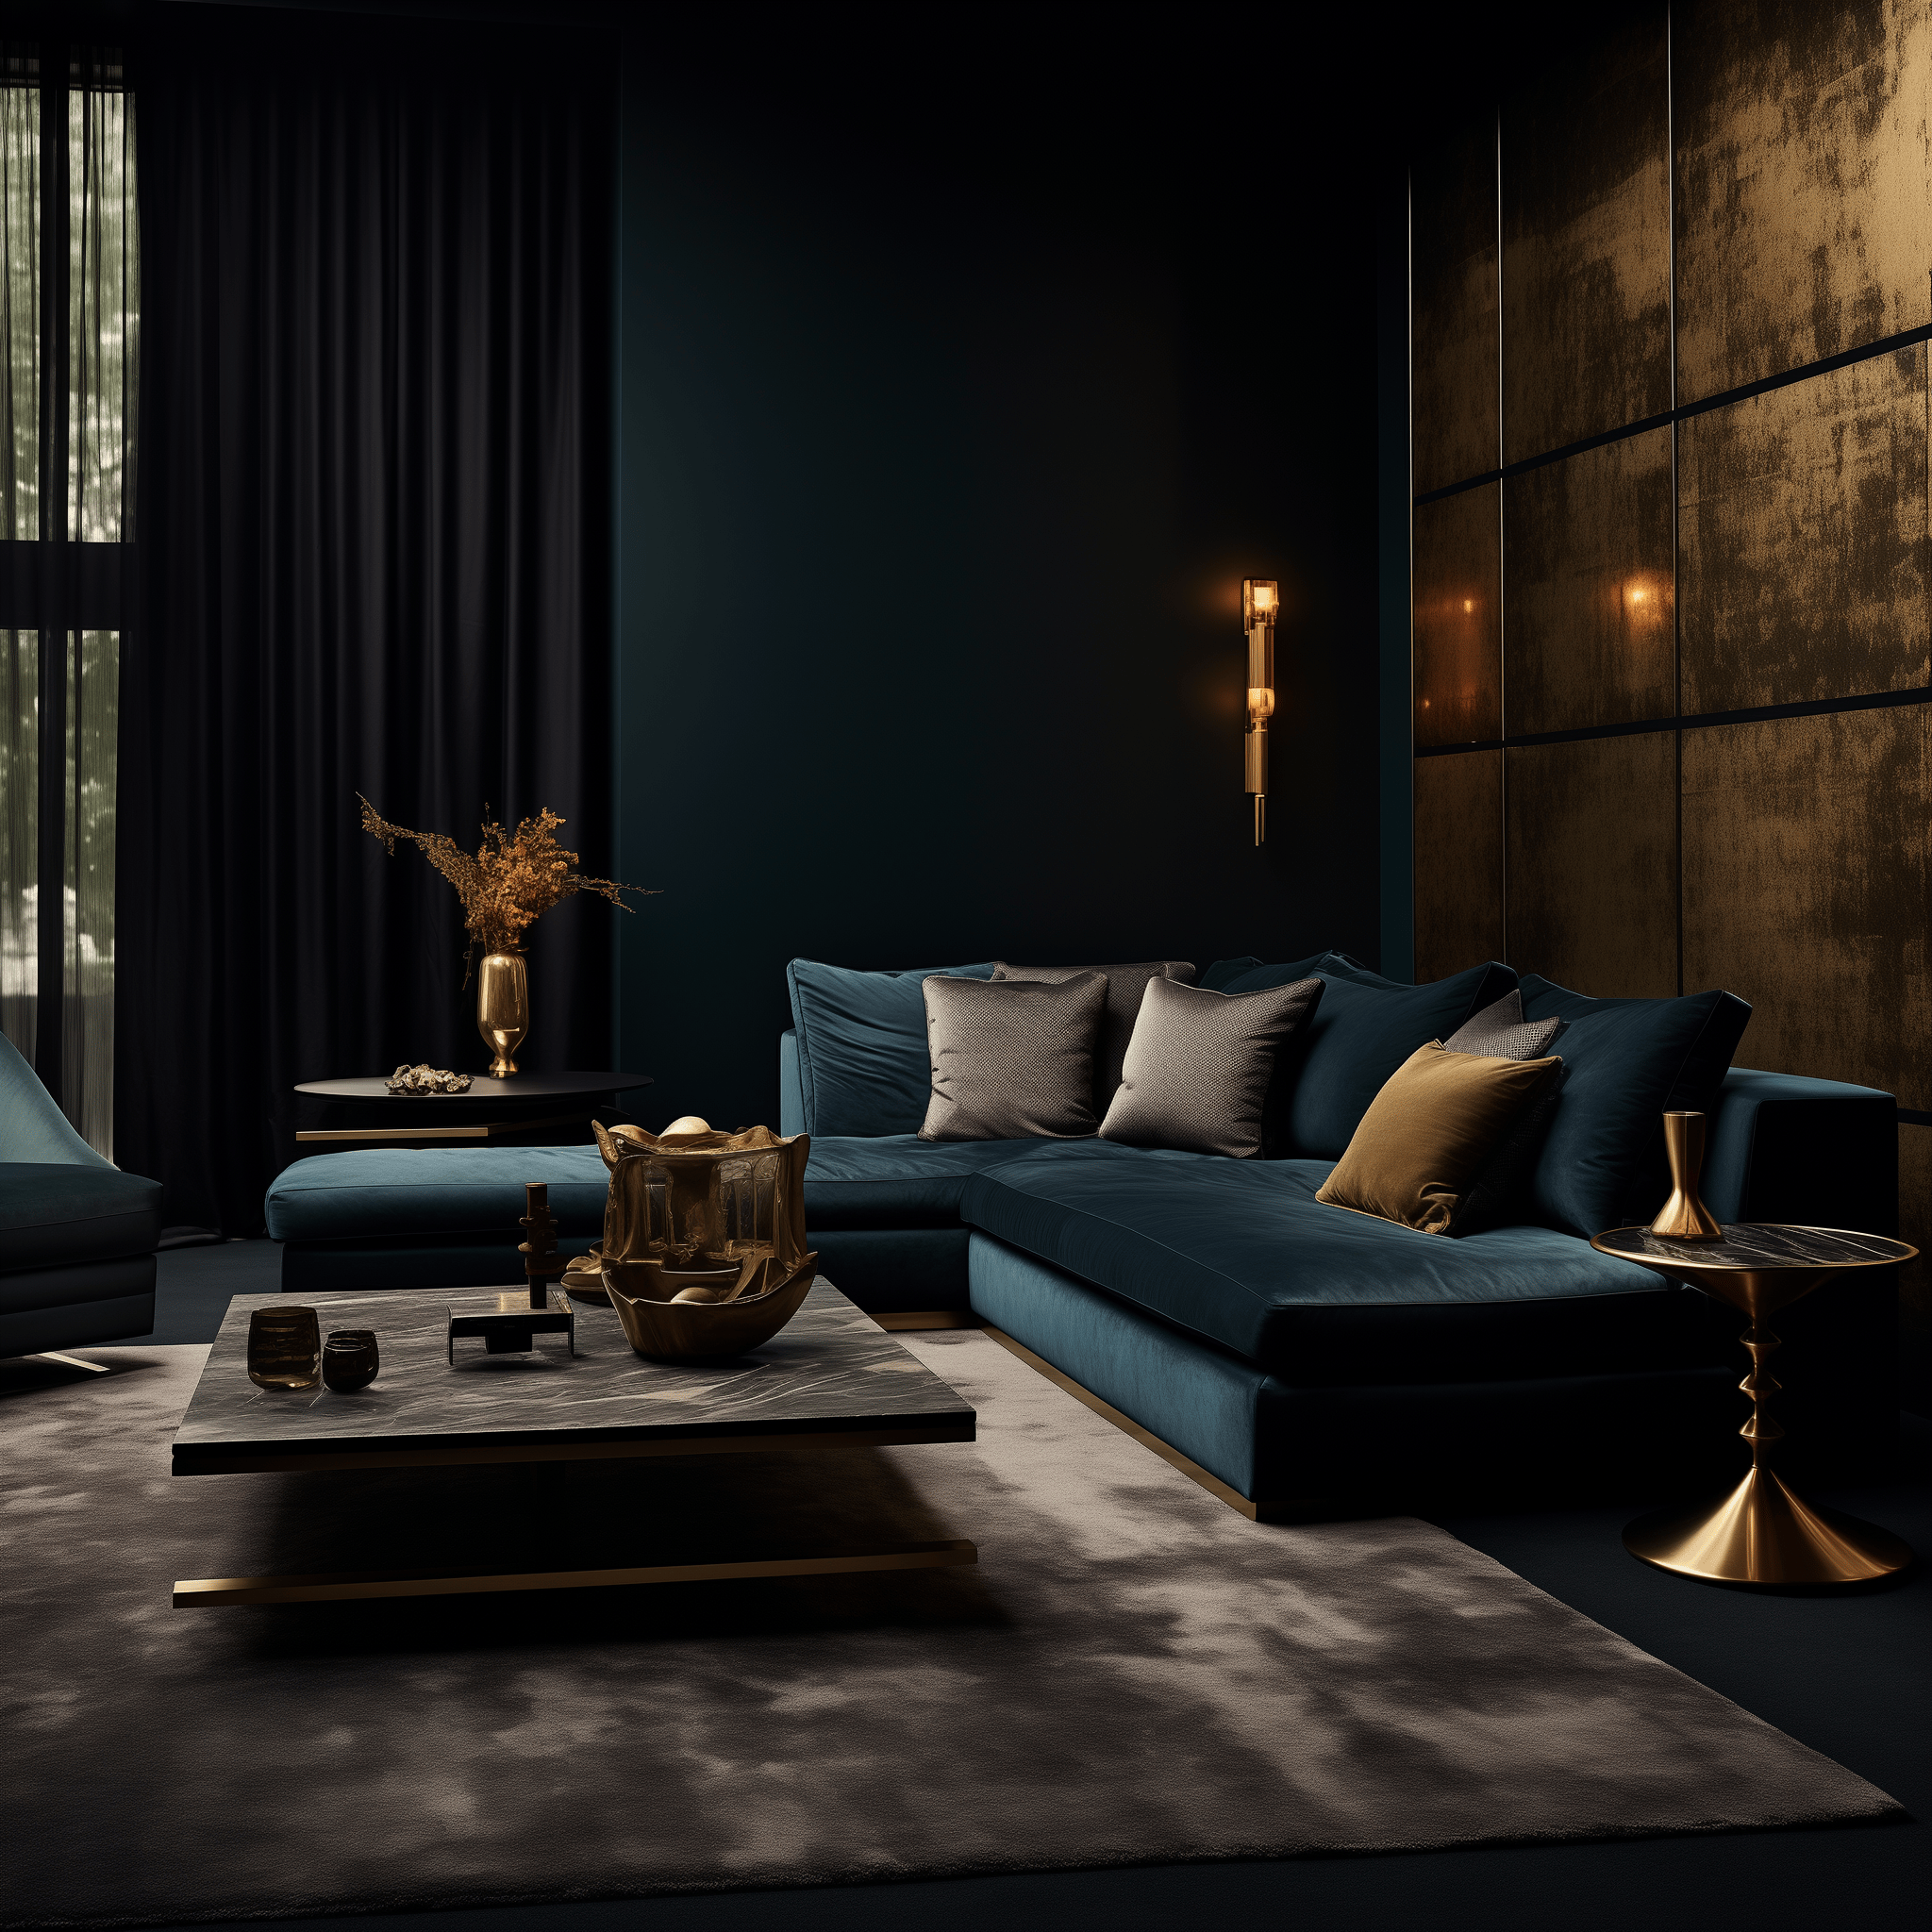 Cozy and luxurious dark living room, captured from an eye-level perspective, showcasing unique wall textures and designer furniture.